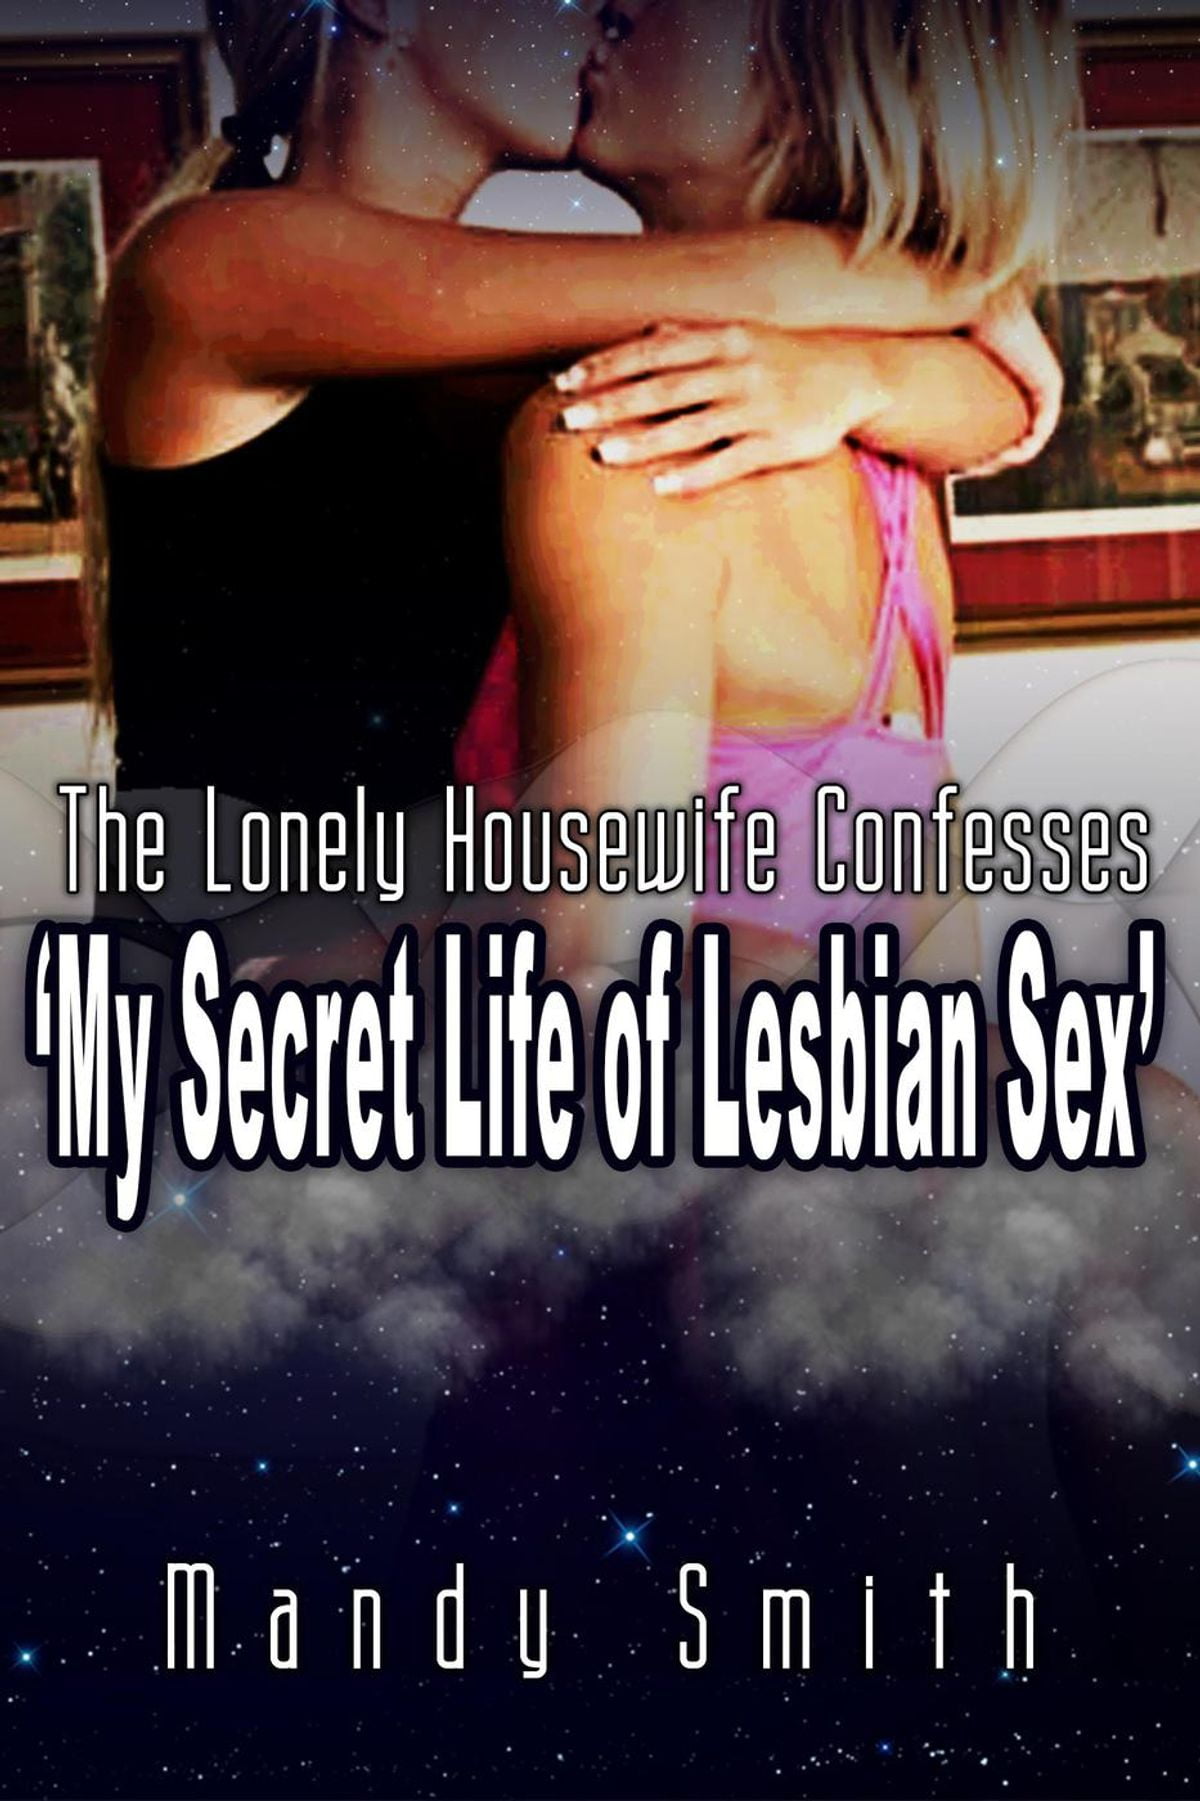 Bored Housewives Need For Lesbian Sex